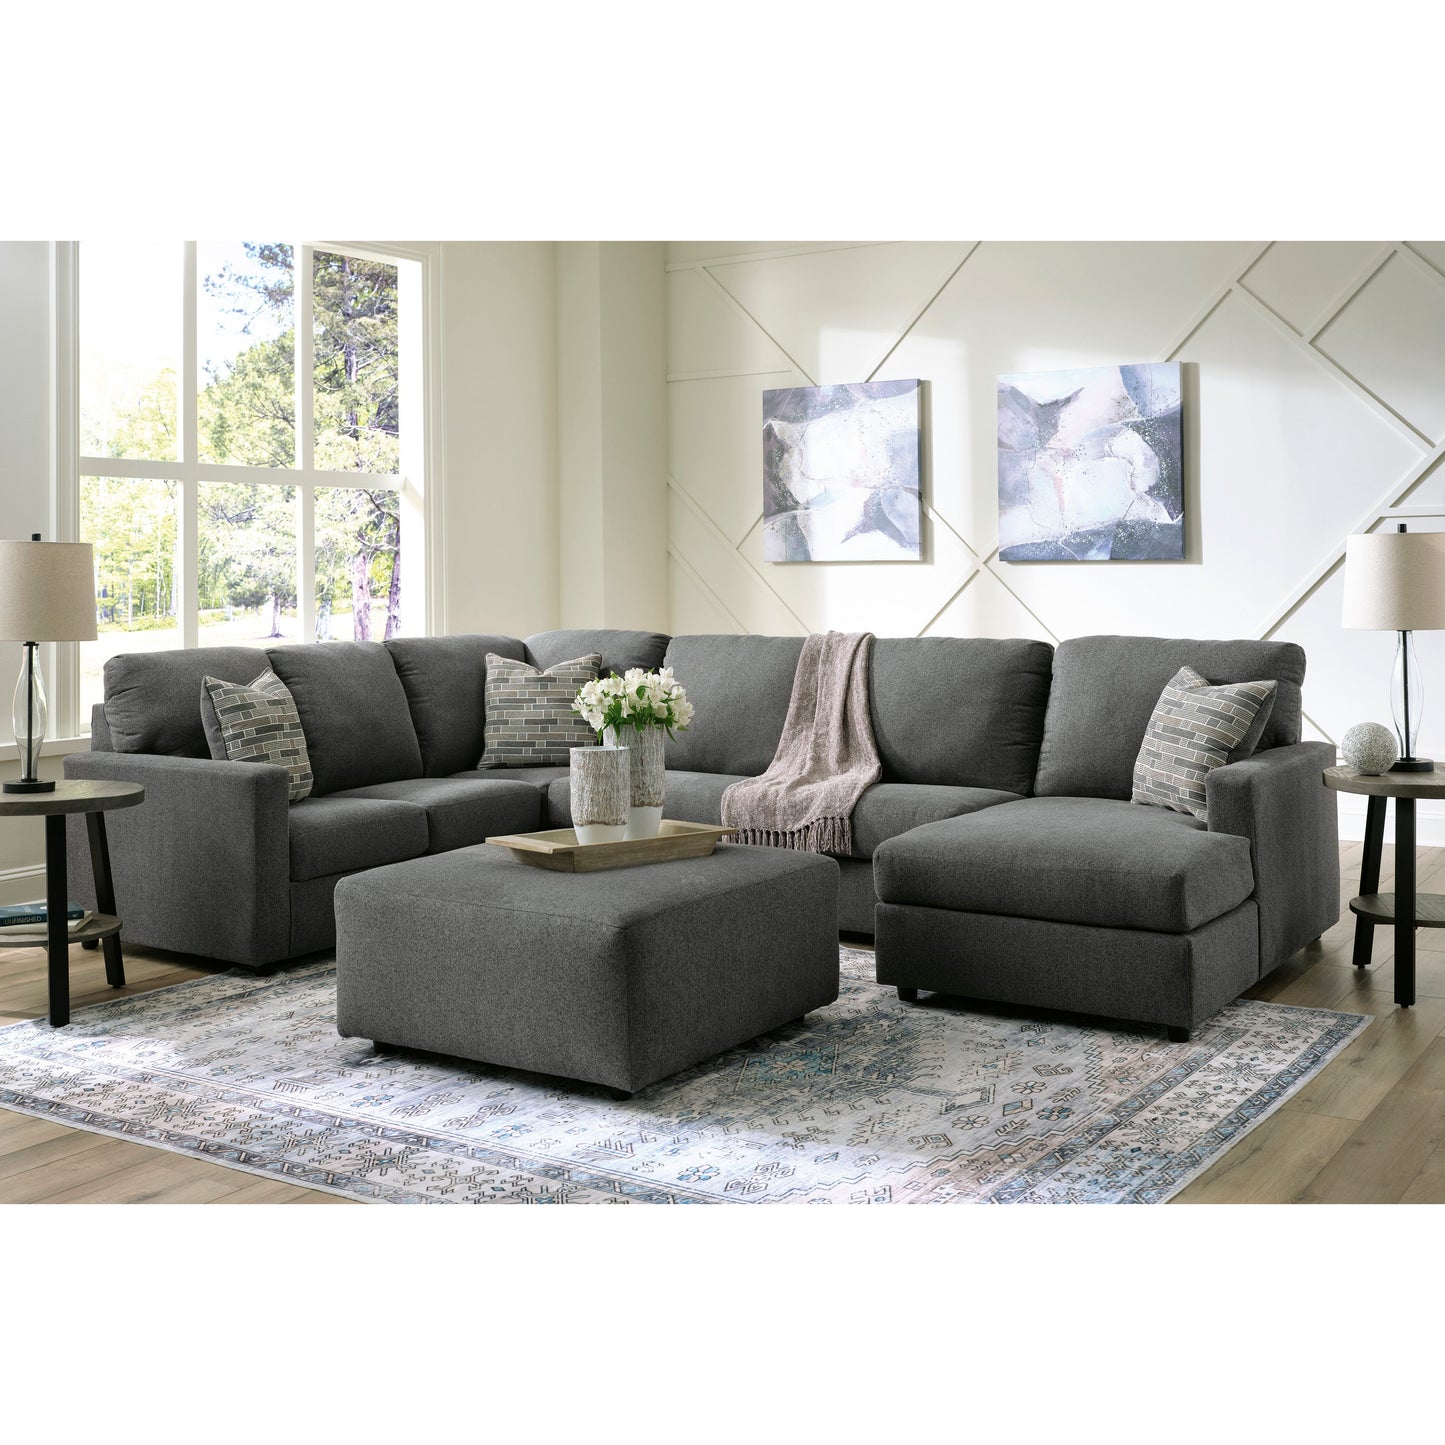 EDENFIELD 3 PC SECTIONAL WITH CHAISE - CHARCOAL